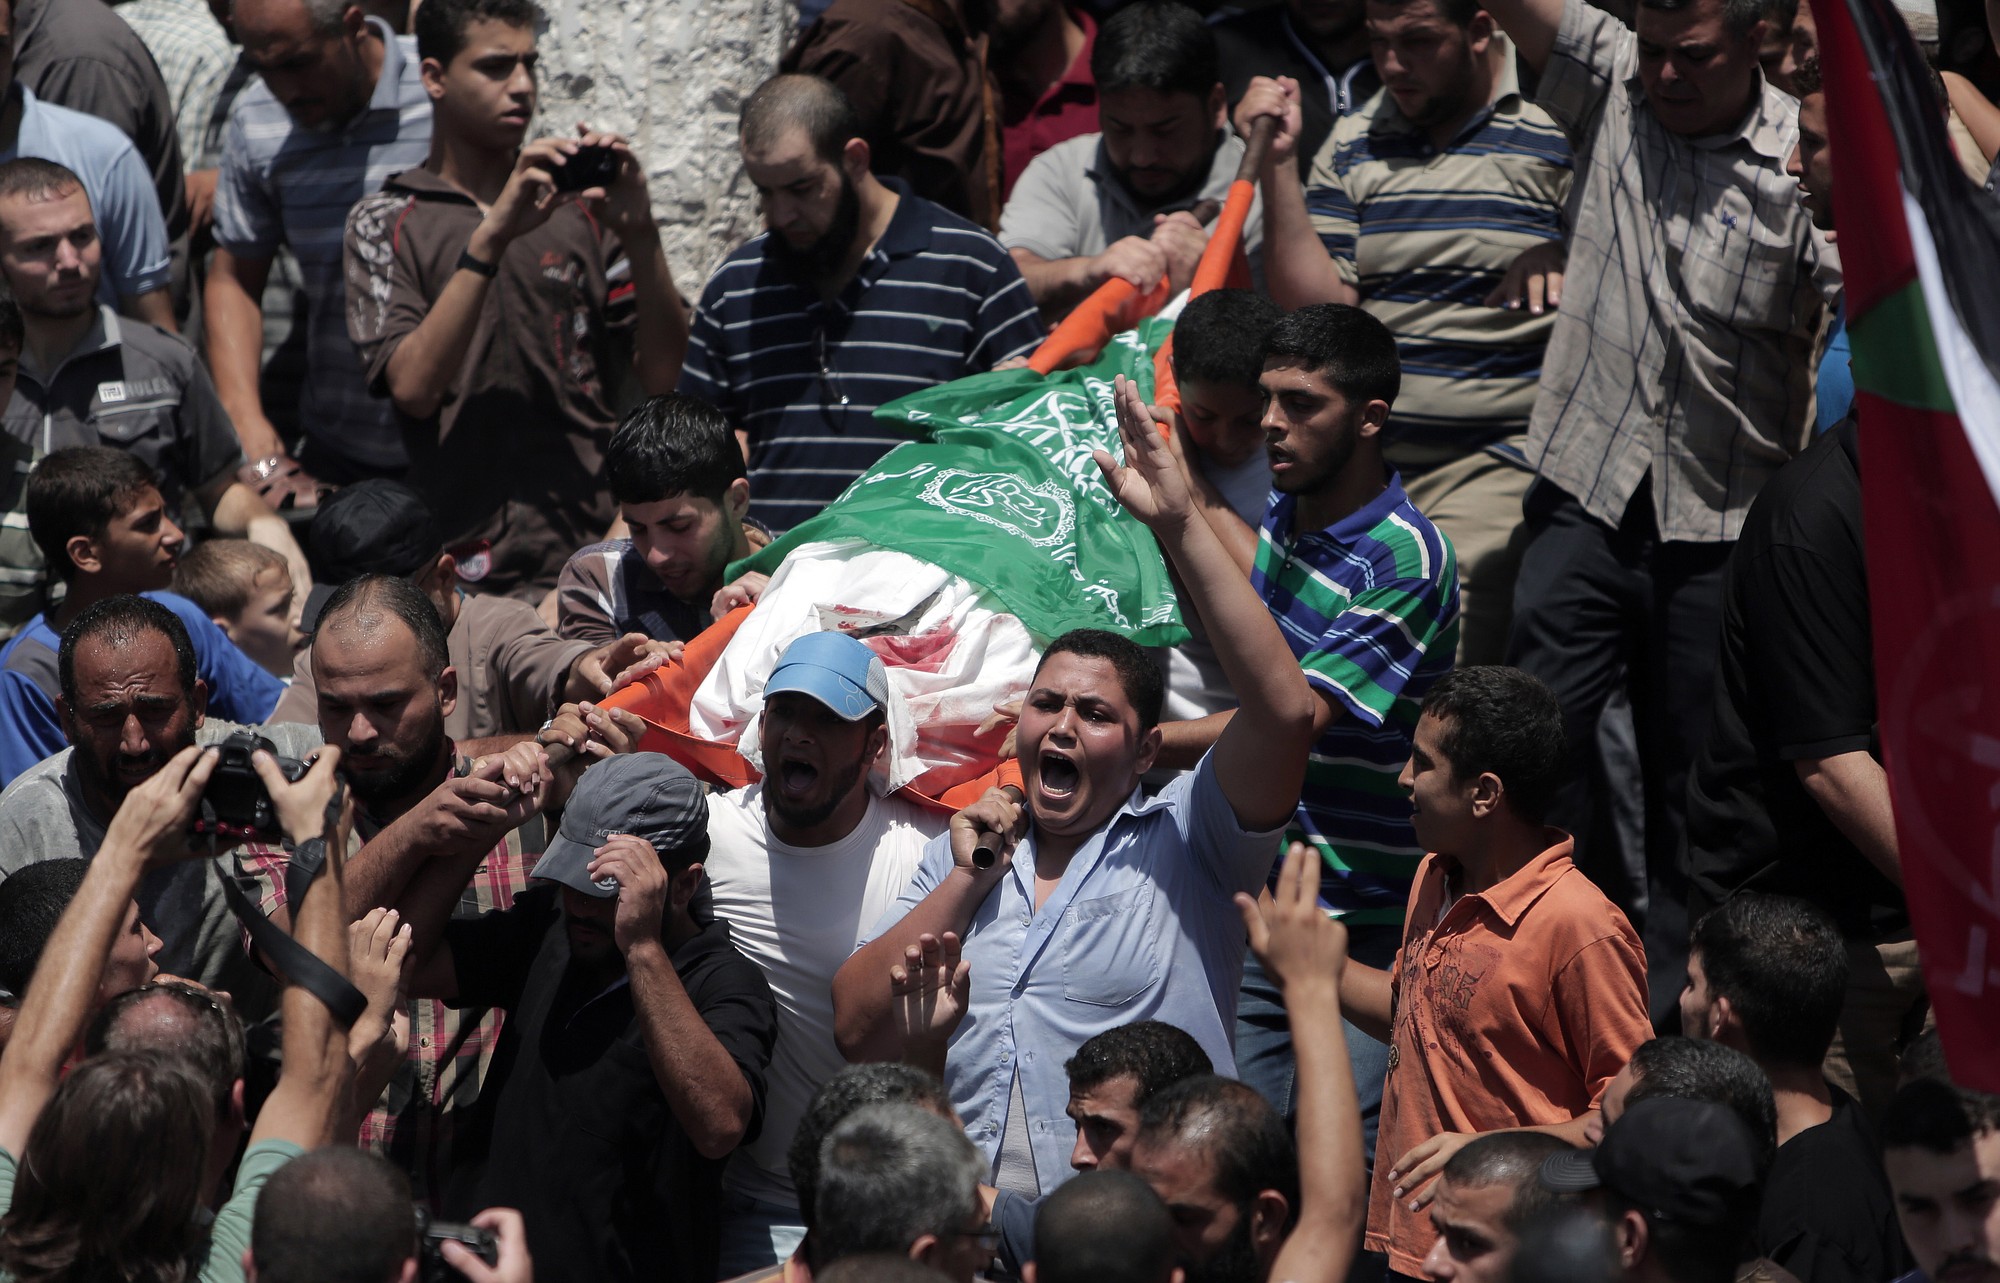 Mourners chant angry slogans during the funeral of Palestinian Widad Mustafa Deif, 27, who was killed along with her 8-month-old son Ali Mohammed Deif in Israeli strikes in Gaza City late Tuesday, during their funeral in Jabaliya refugee camp in the northern Gaza Stri on Wednesday.